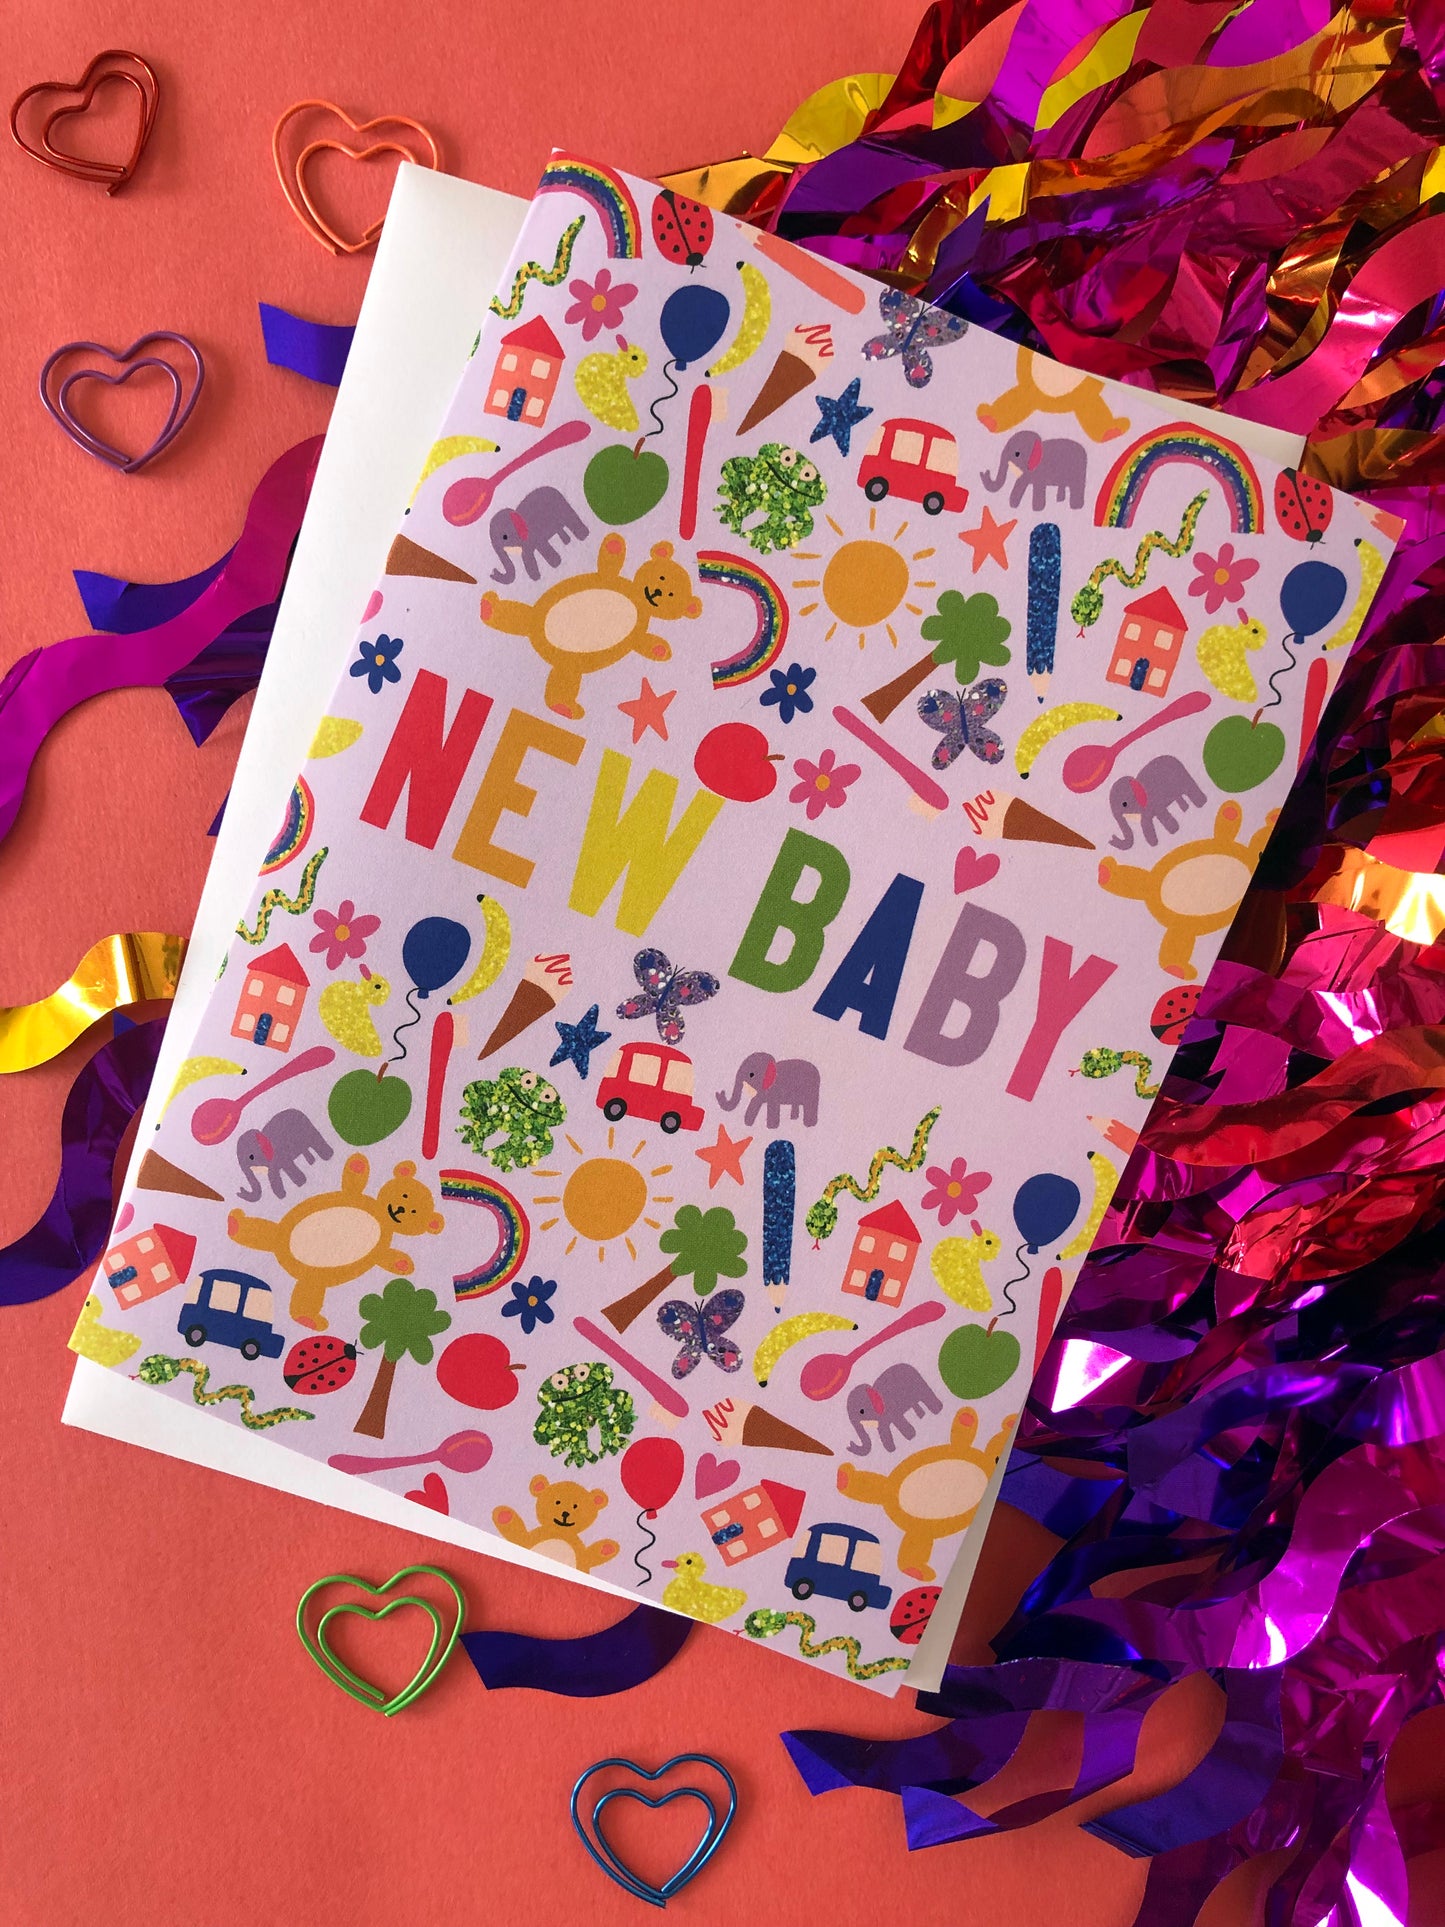 Small World New Baby Card